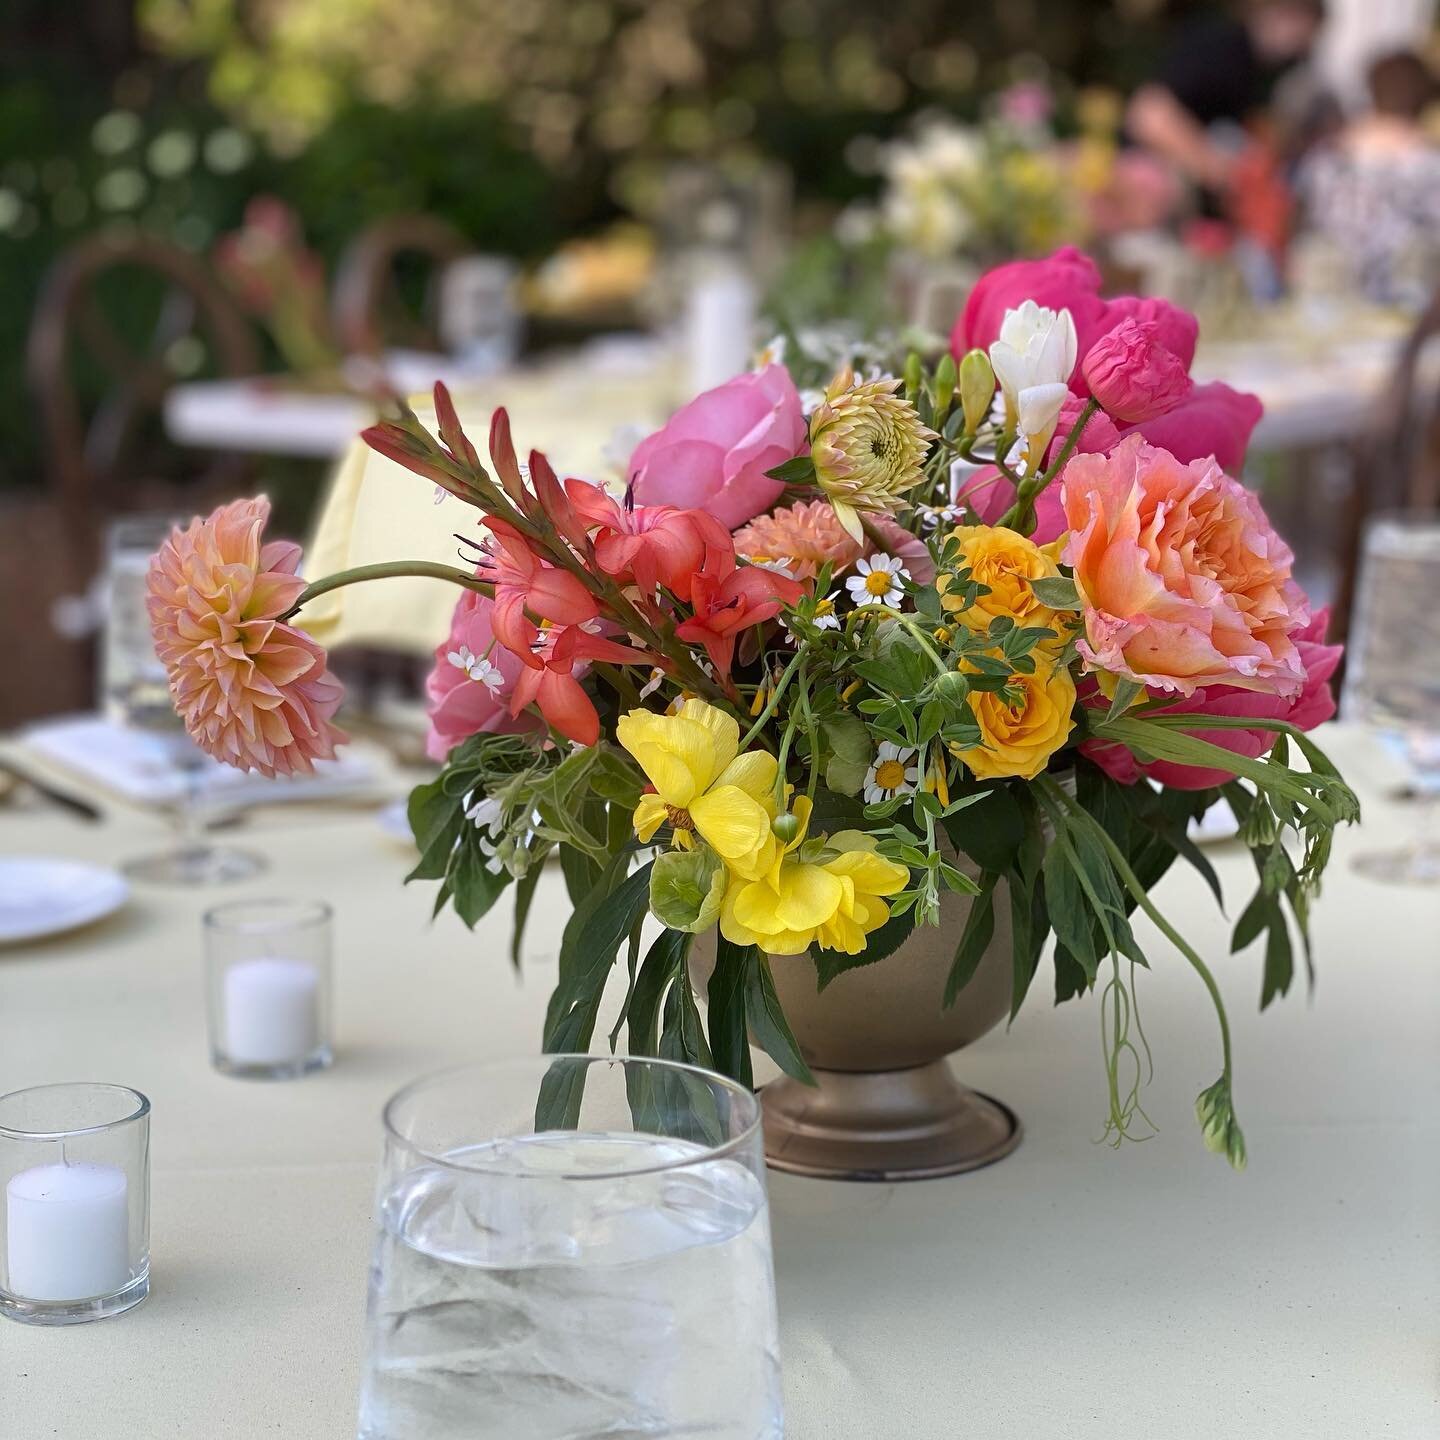 Perfect with #nofiltersneeded I love this cooler palate for summer in #charlestonsc .  #destinationweddings  #clevents #loveisintheair❤️ Shout out to Roadside Blooms for executing the vision perfectly !